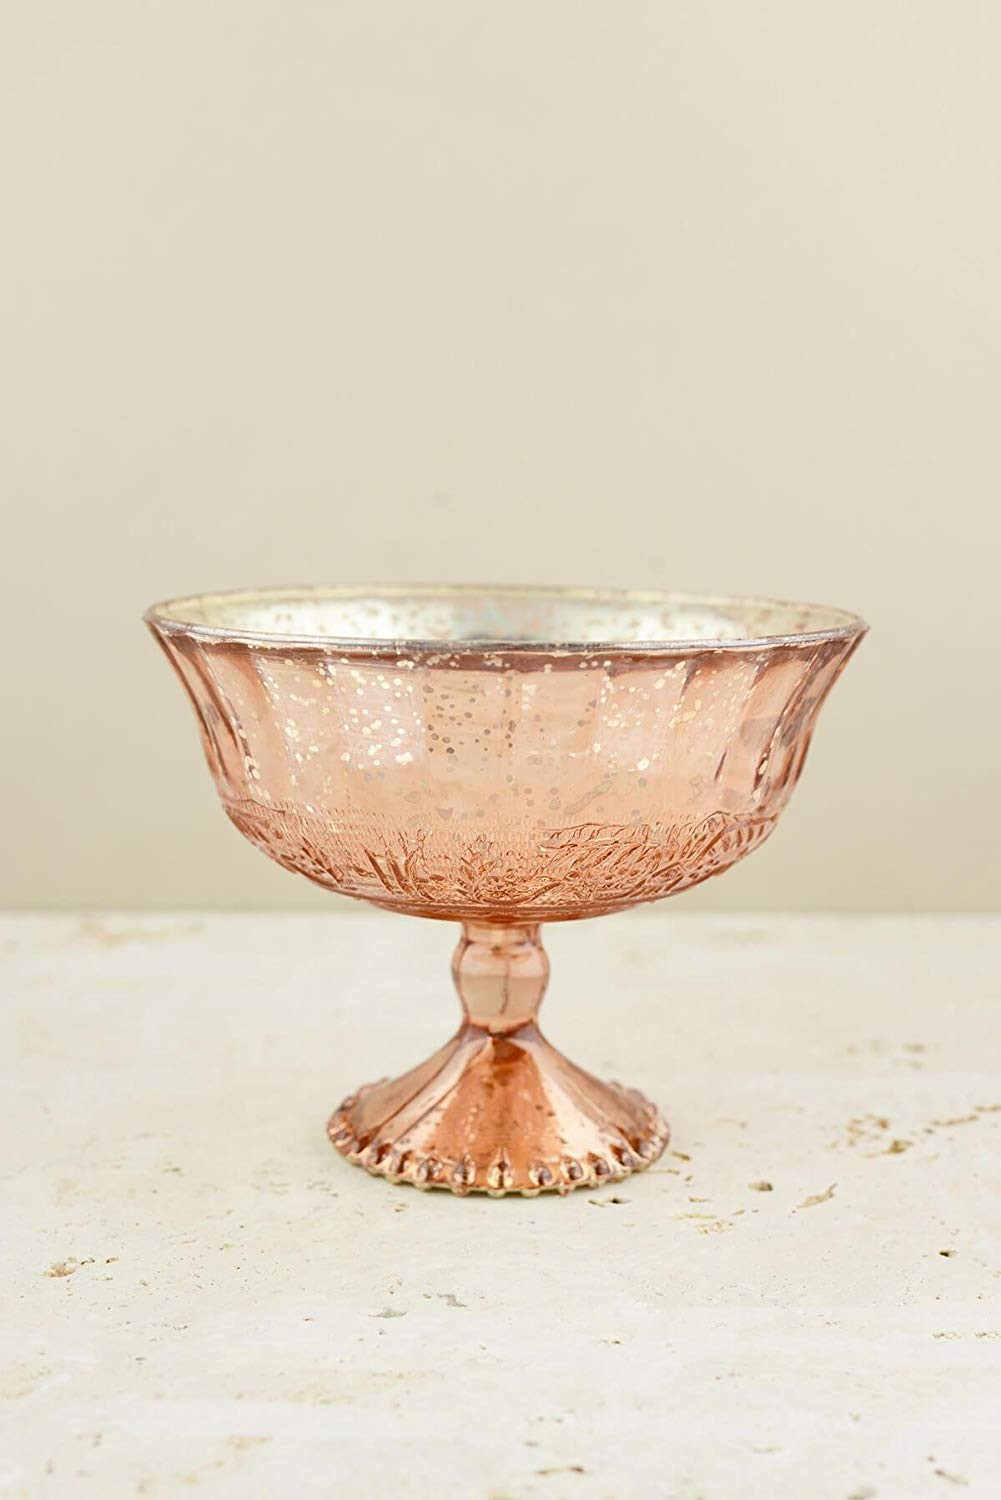 18 Nice Gold Compote Vase Bulk 2024 free download gold compote vase bulk of amazon com richland mercury glass compote rose gold 7 x 5 5 home with regard to amazon com richland mercury glass compote rose gold 7 x 5 5 home kitchen